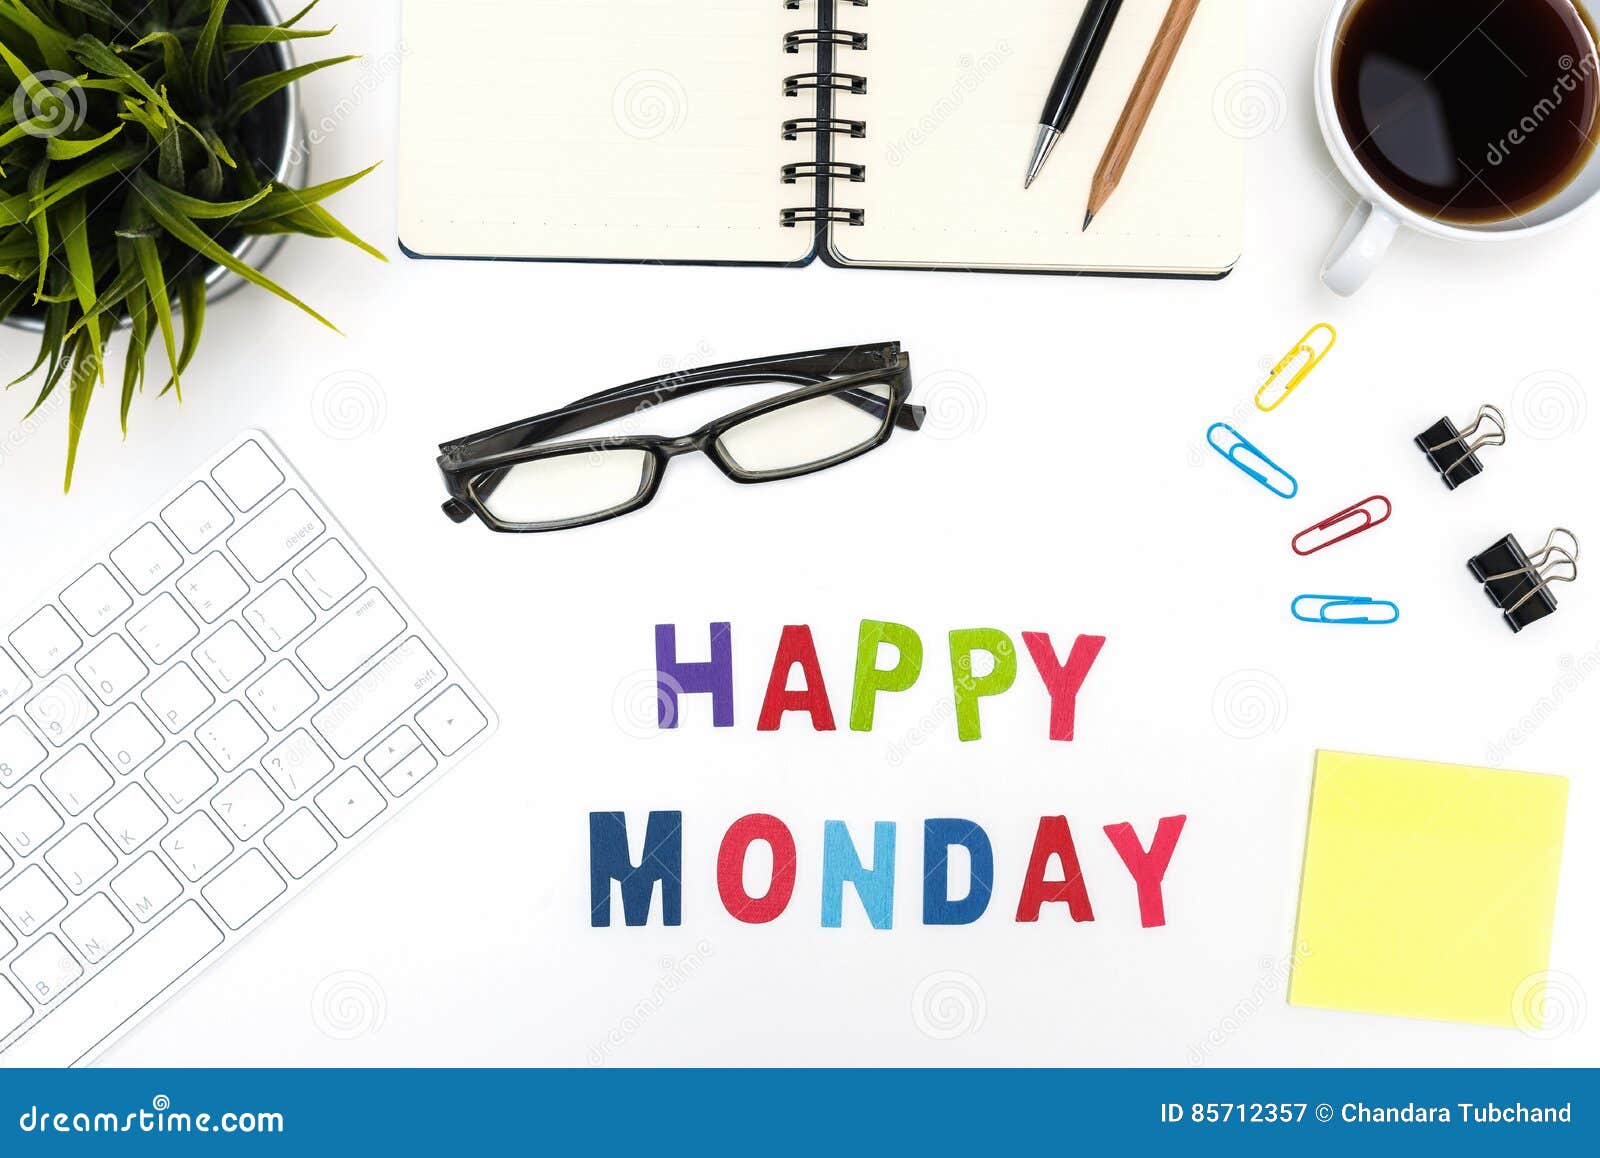 Office Desk Table with Happy Monday Word Stock Image - Image of open ...